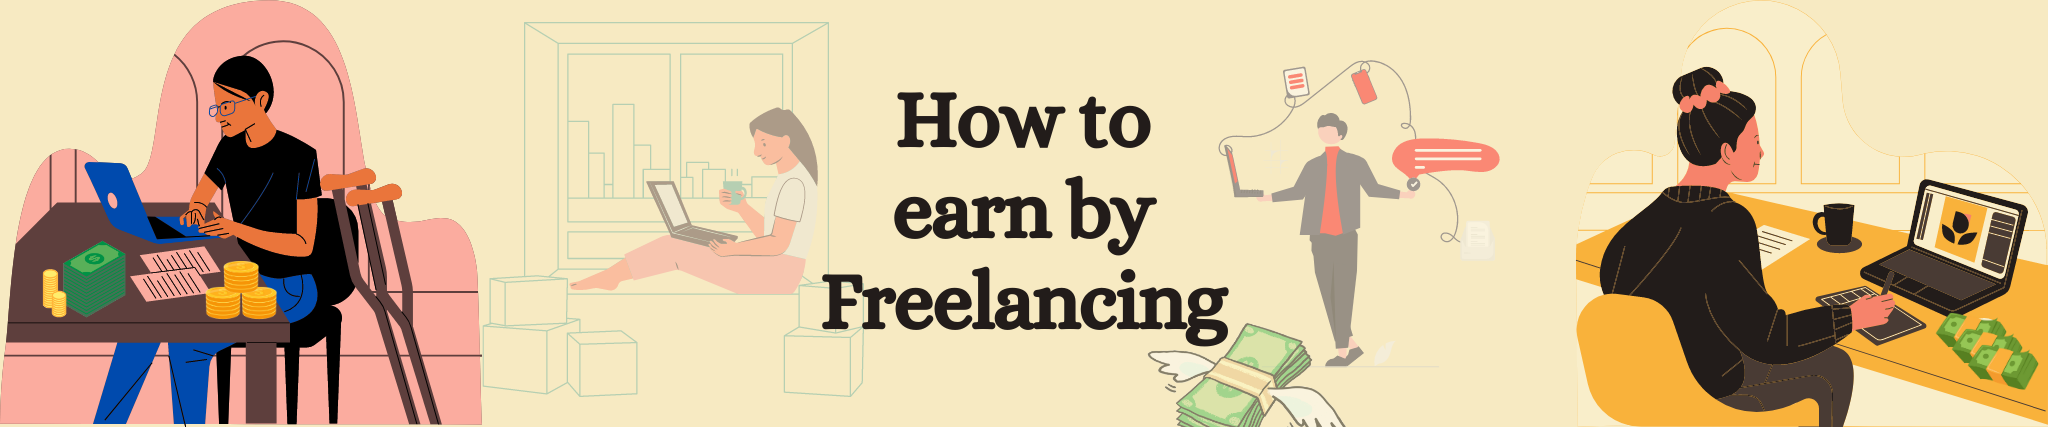 How to Earn by Freelancing